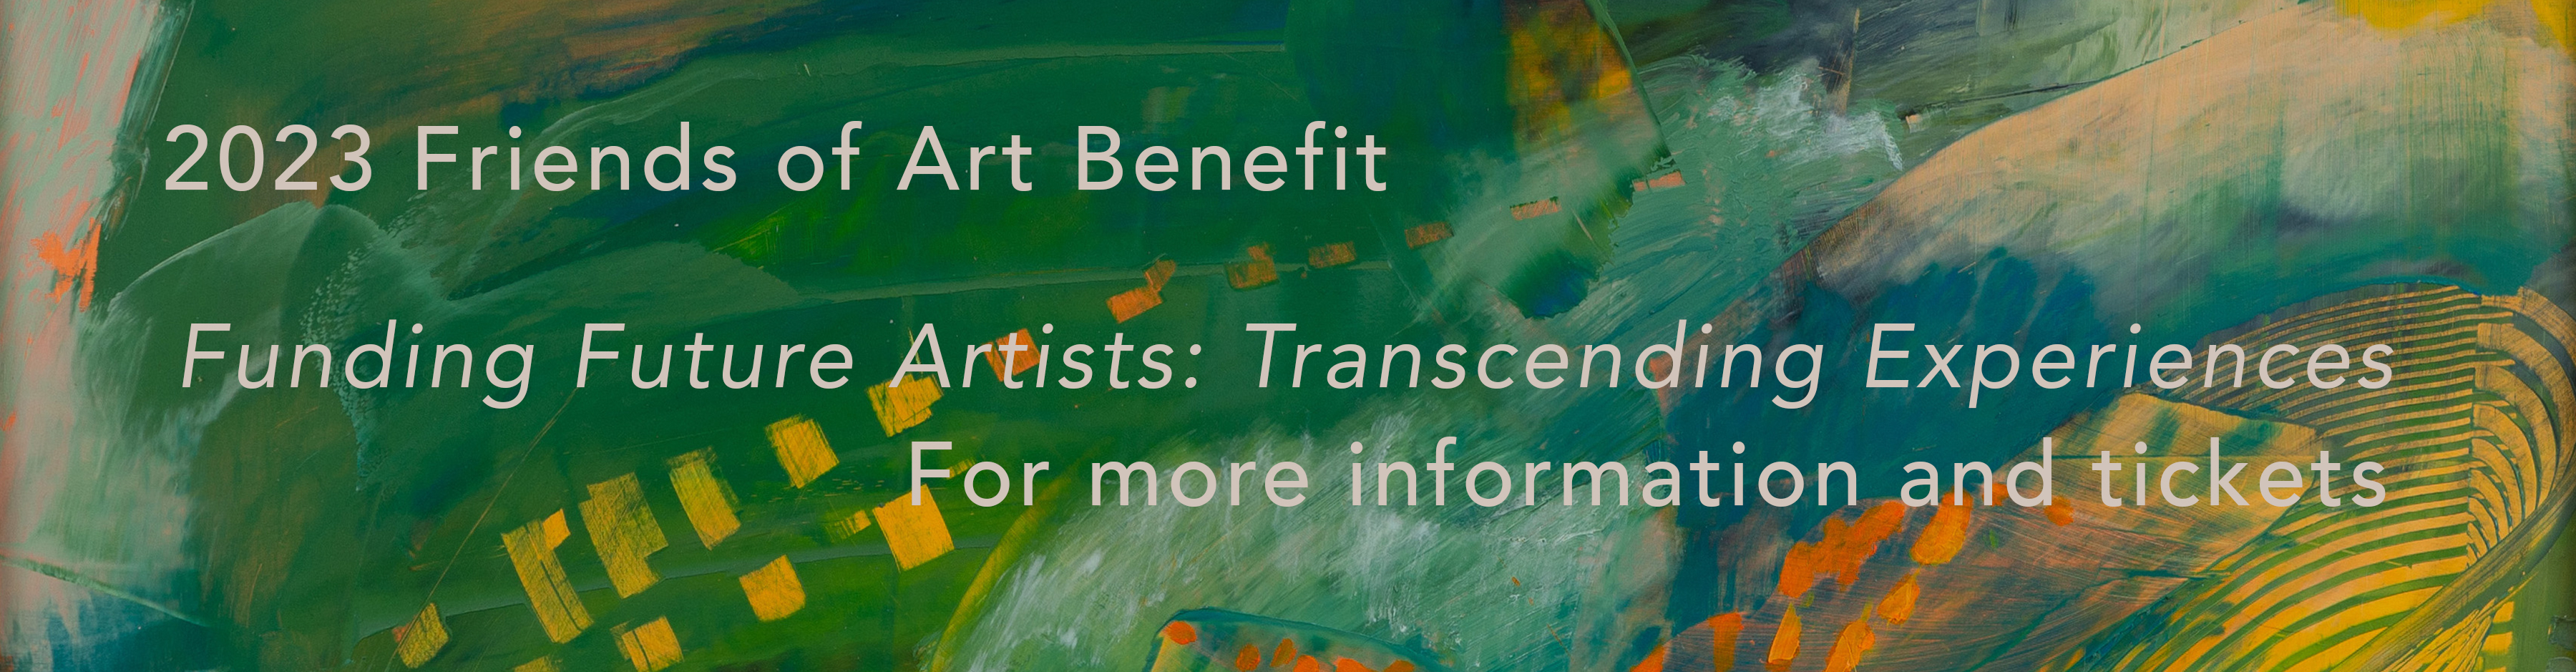 More information of the 2023 Friends of Art Benefit Funding Future Artists Transcending Experiences